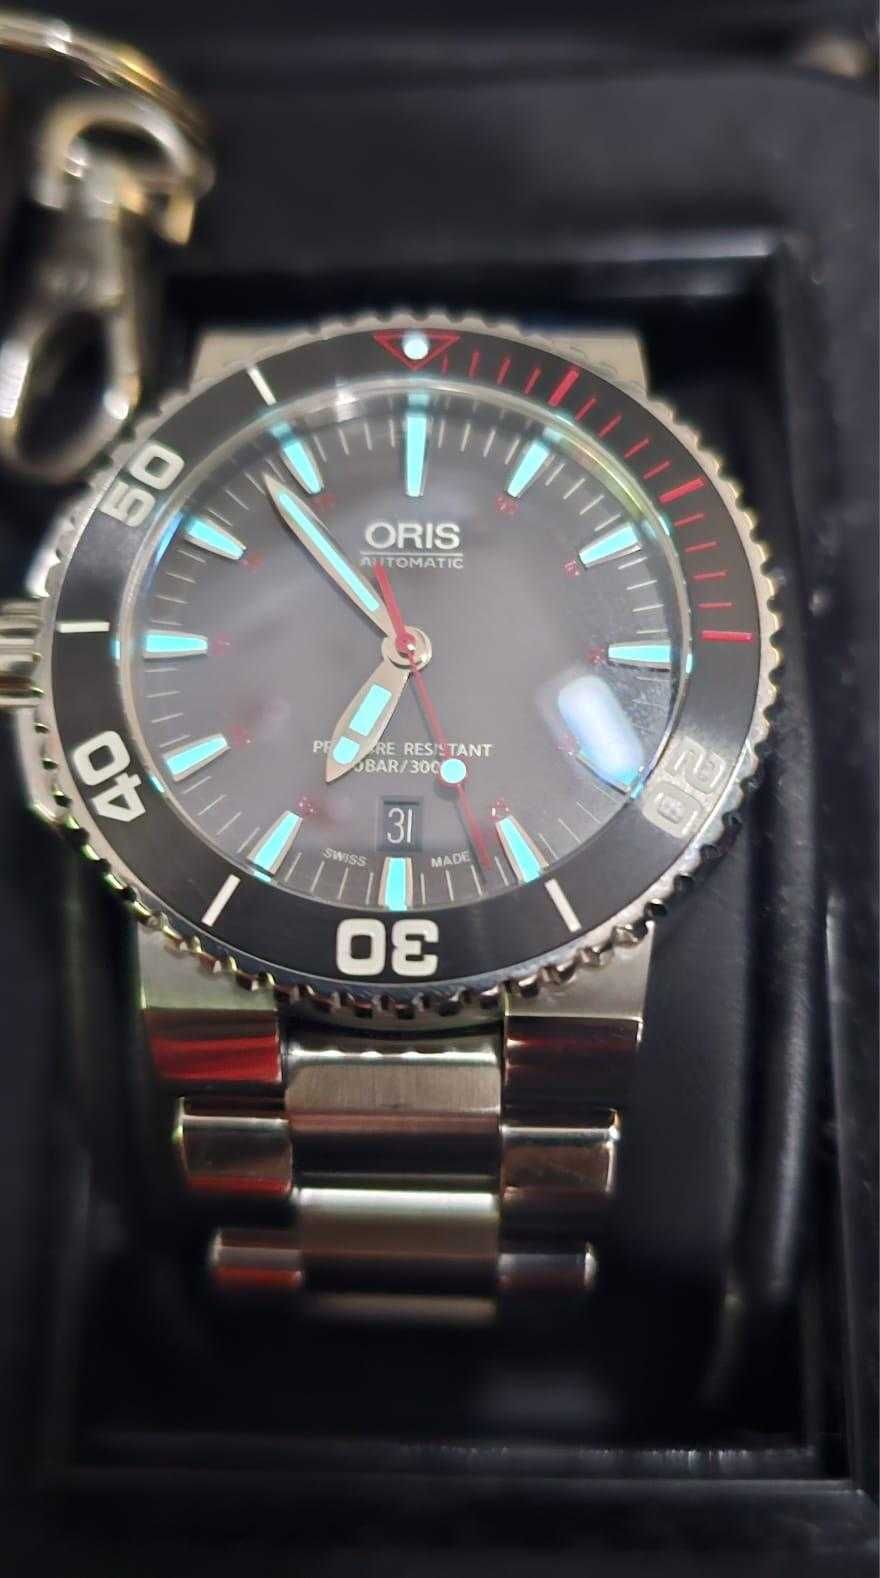 Oris Aquis Red 43mm Limited Edition